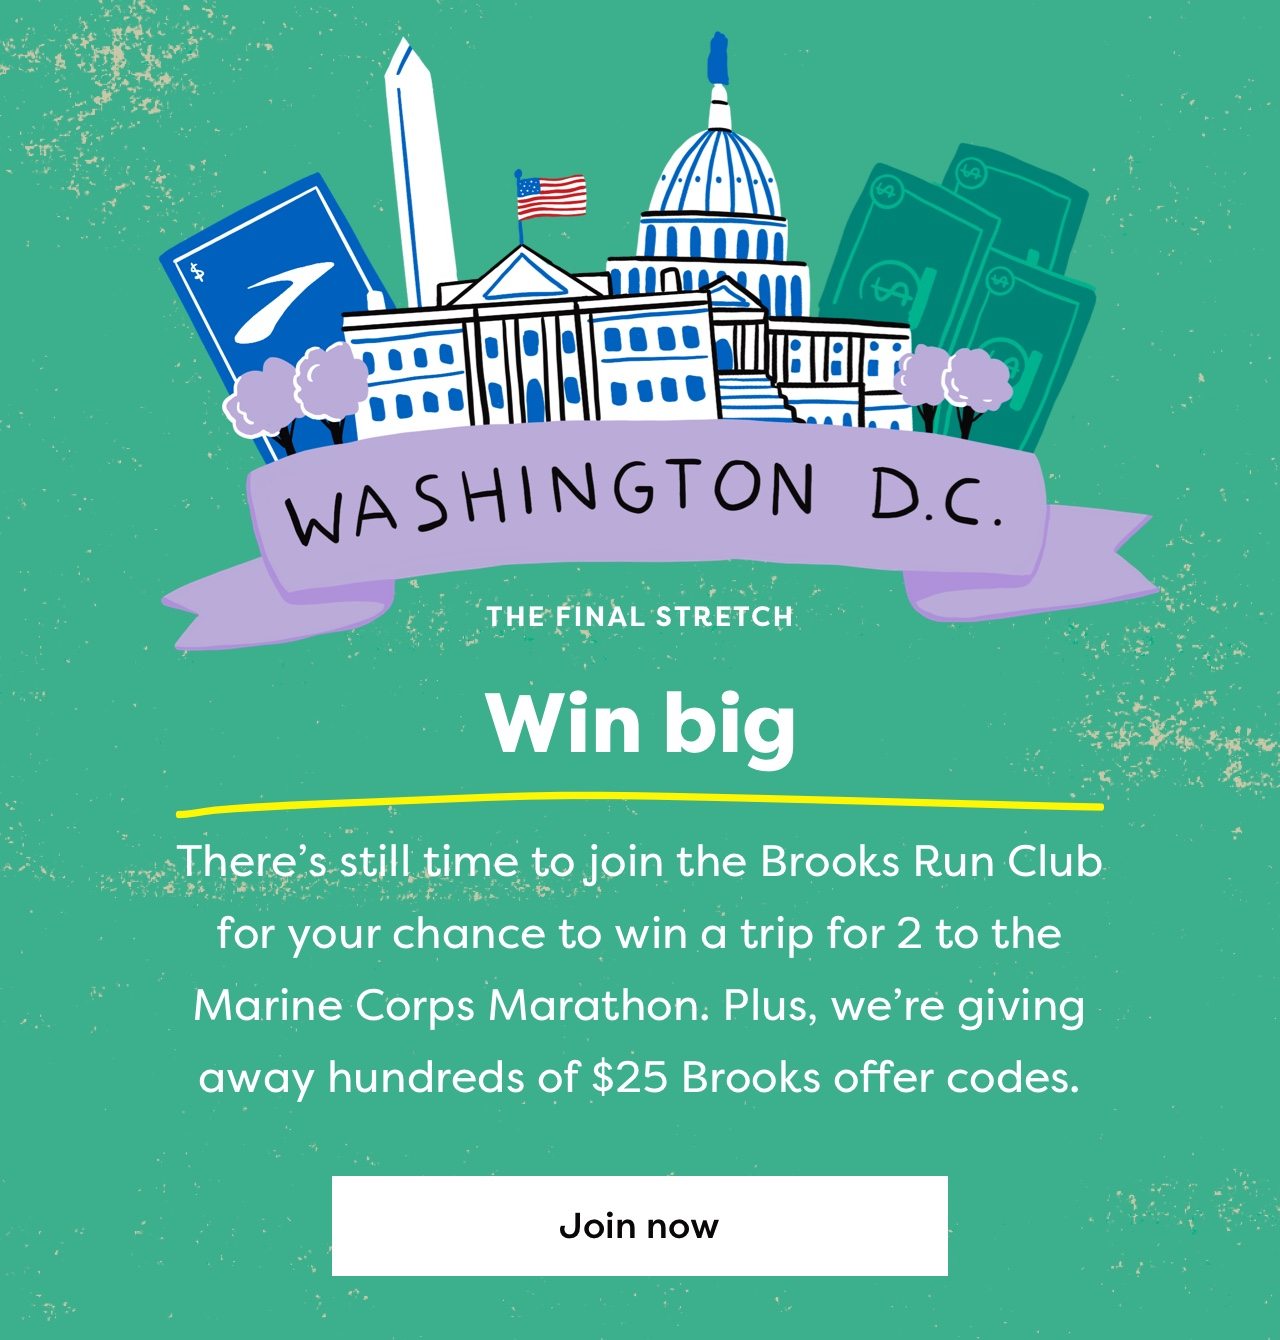 WASHINGTON D.C. | THE FINAL STRETCH | Win big | There's still time to join the Brooks Run Club for your chance to win a trip for 2 to the Marine Corps Marathon. Plus, we're giving away hundreds of $25 Brooks offer codes. | Join now